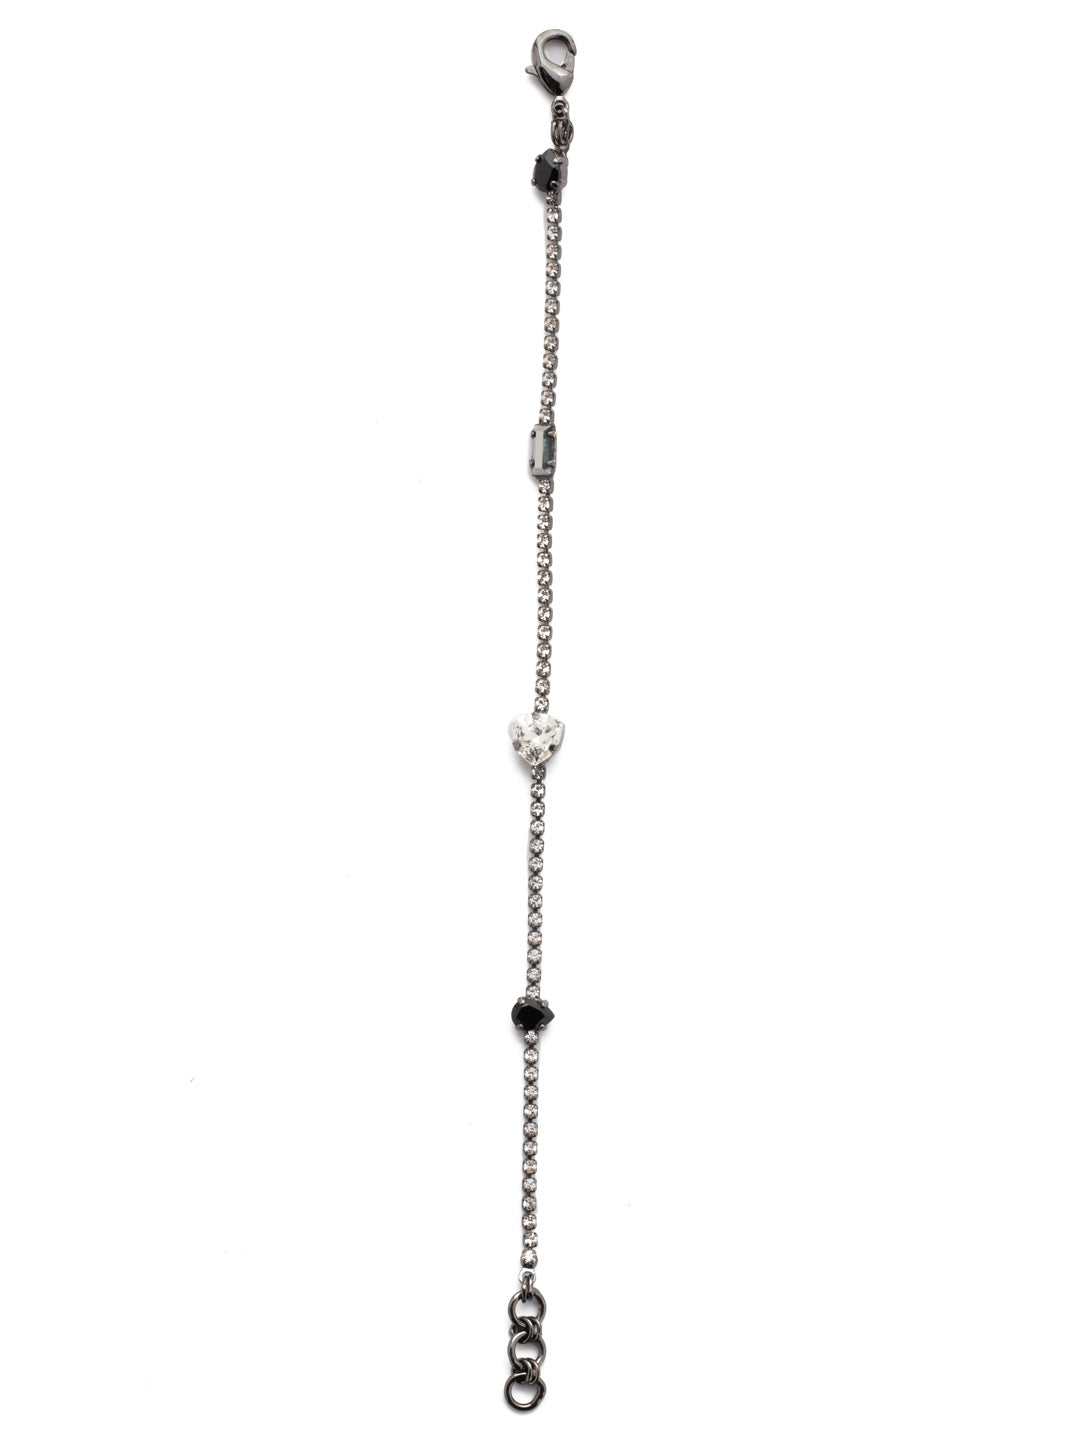 Ophelia Tennis Bracelet - BEP9GMMMO - <p>The Ophelia Tennis Bracelet is dainty and perfect for layering. Delicate round crystals are accented by a touch of larger pieces in navette, pear and bagette shapes and varying shades. From Sorrelli's Midnight Moon collection in our Gun Metal finish.</p>